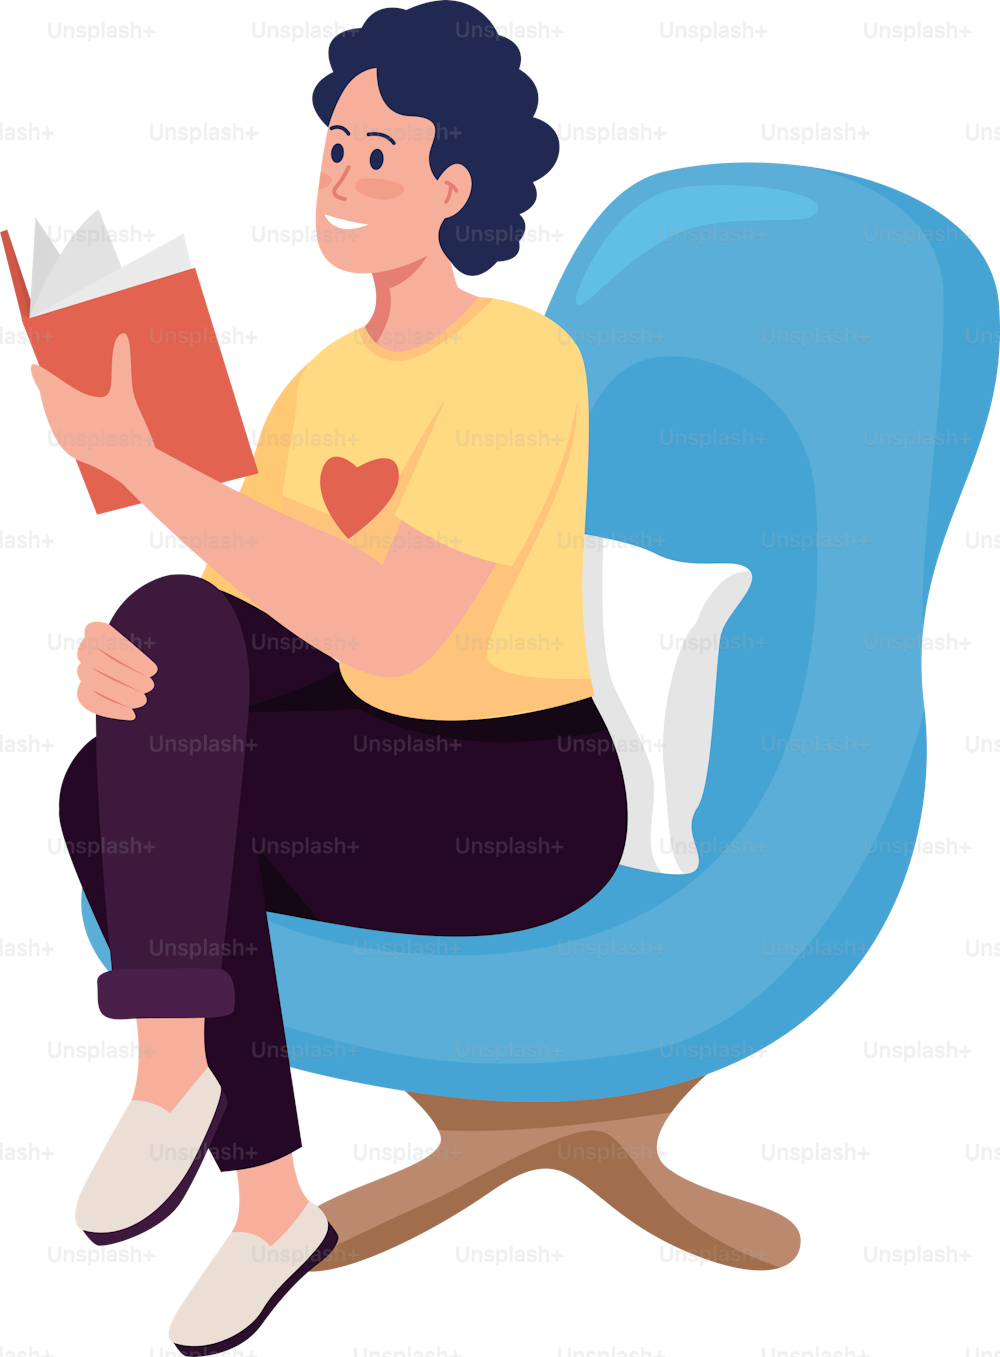 Volunteer reading semi flat color vector character. Posing figure. Full body person on white. Social service worker isolated modern cartoon style illustration for graphic design and animation